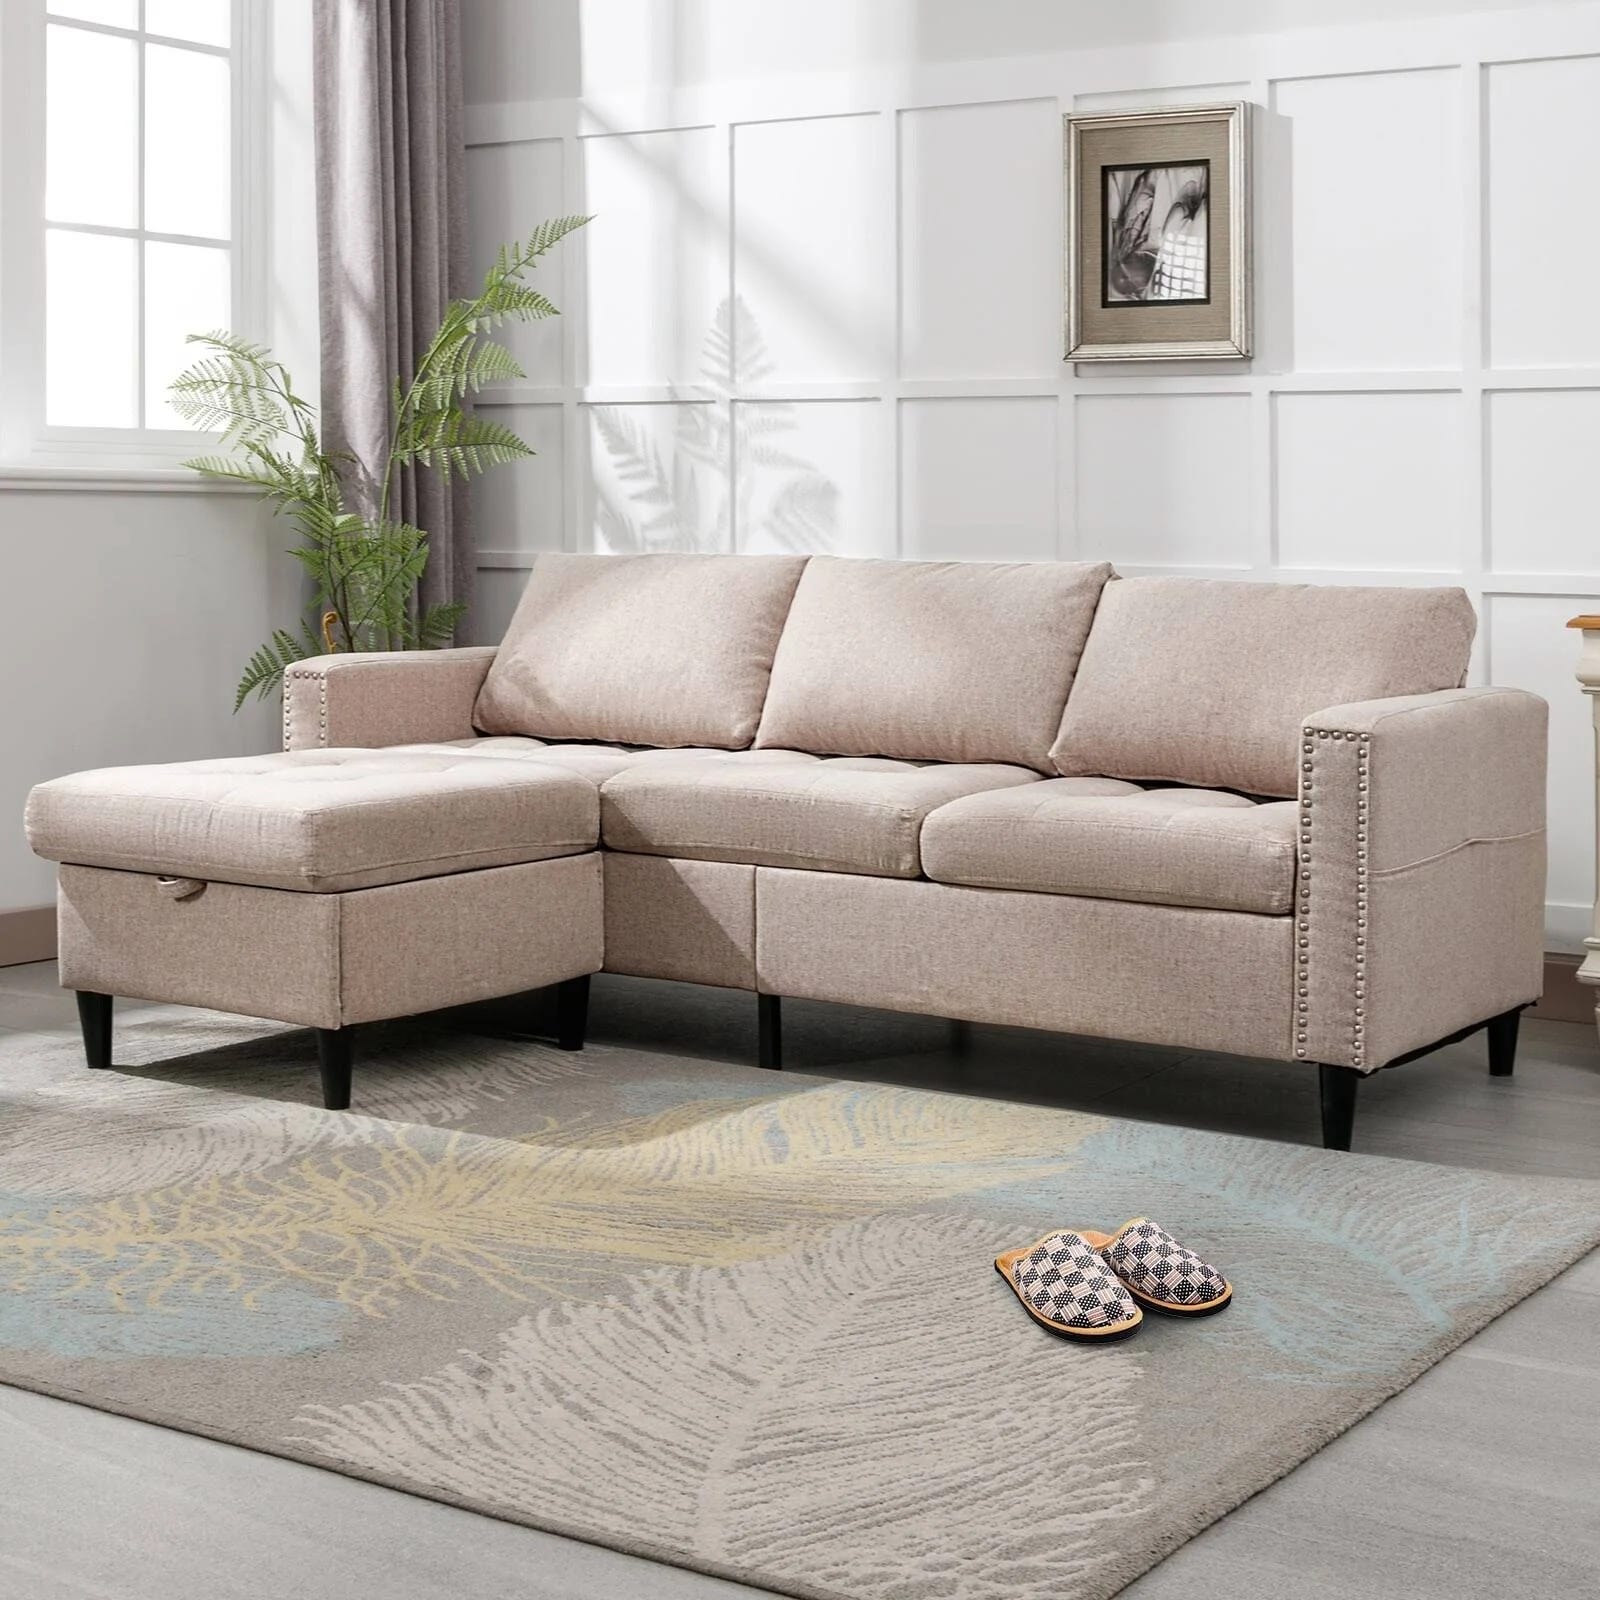 Miox Seat Multi-Functional Sofa with L-Shaped & Storage Ottoman | Image